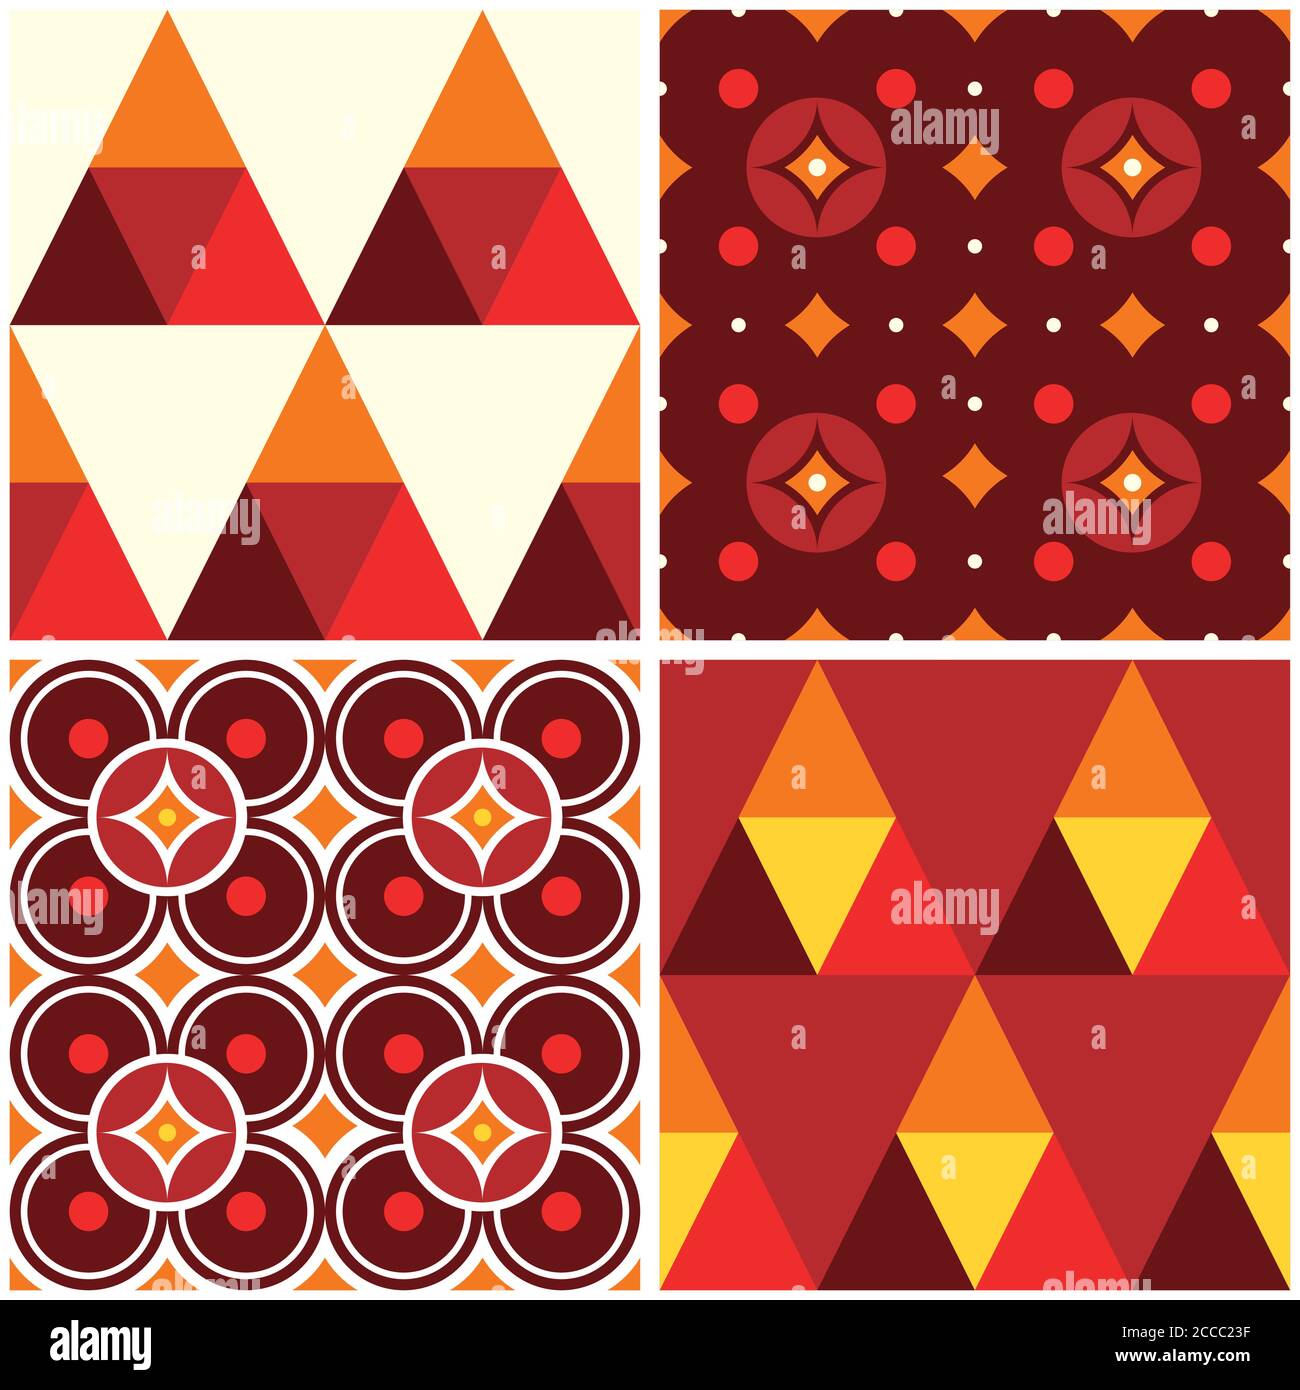 158,772 60s Pattern Images, Stock Photos, 3D objects, & Vectors